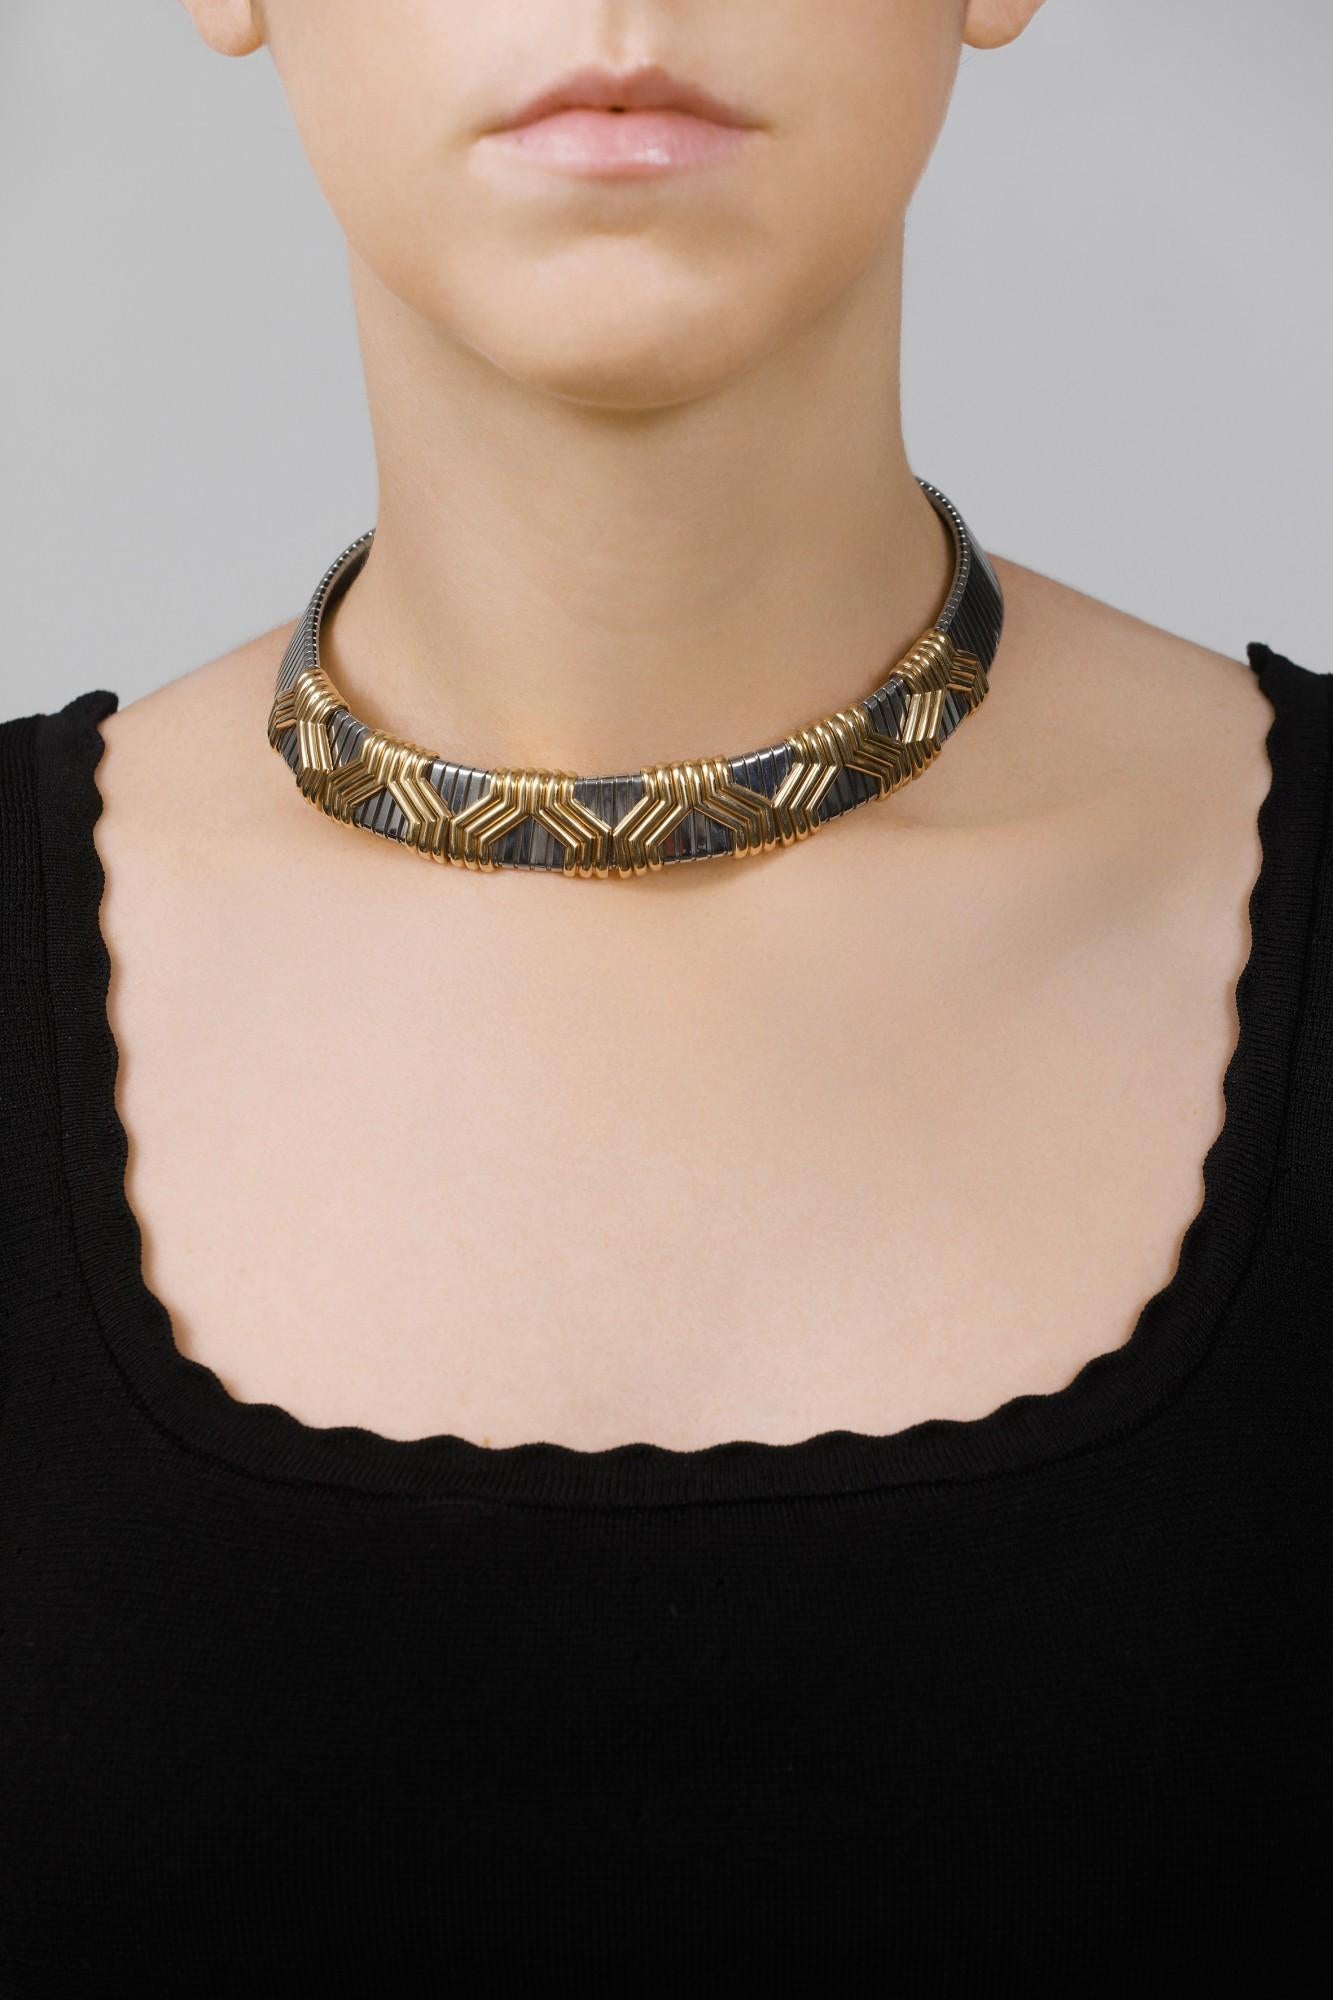 A chic Bulgari choker necklace composed of steel tubogas piping, the front embellished with gold geometric motifs. Maximum length approximately 430mm, signed Bulgari, Italian assay mark for gold and maker's mark.